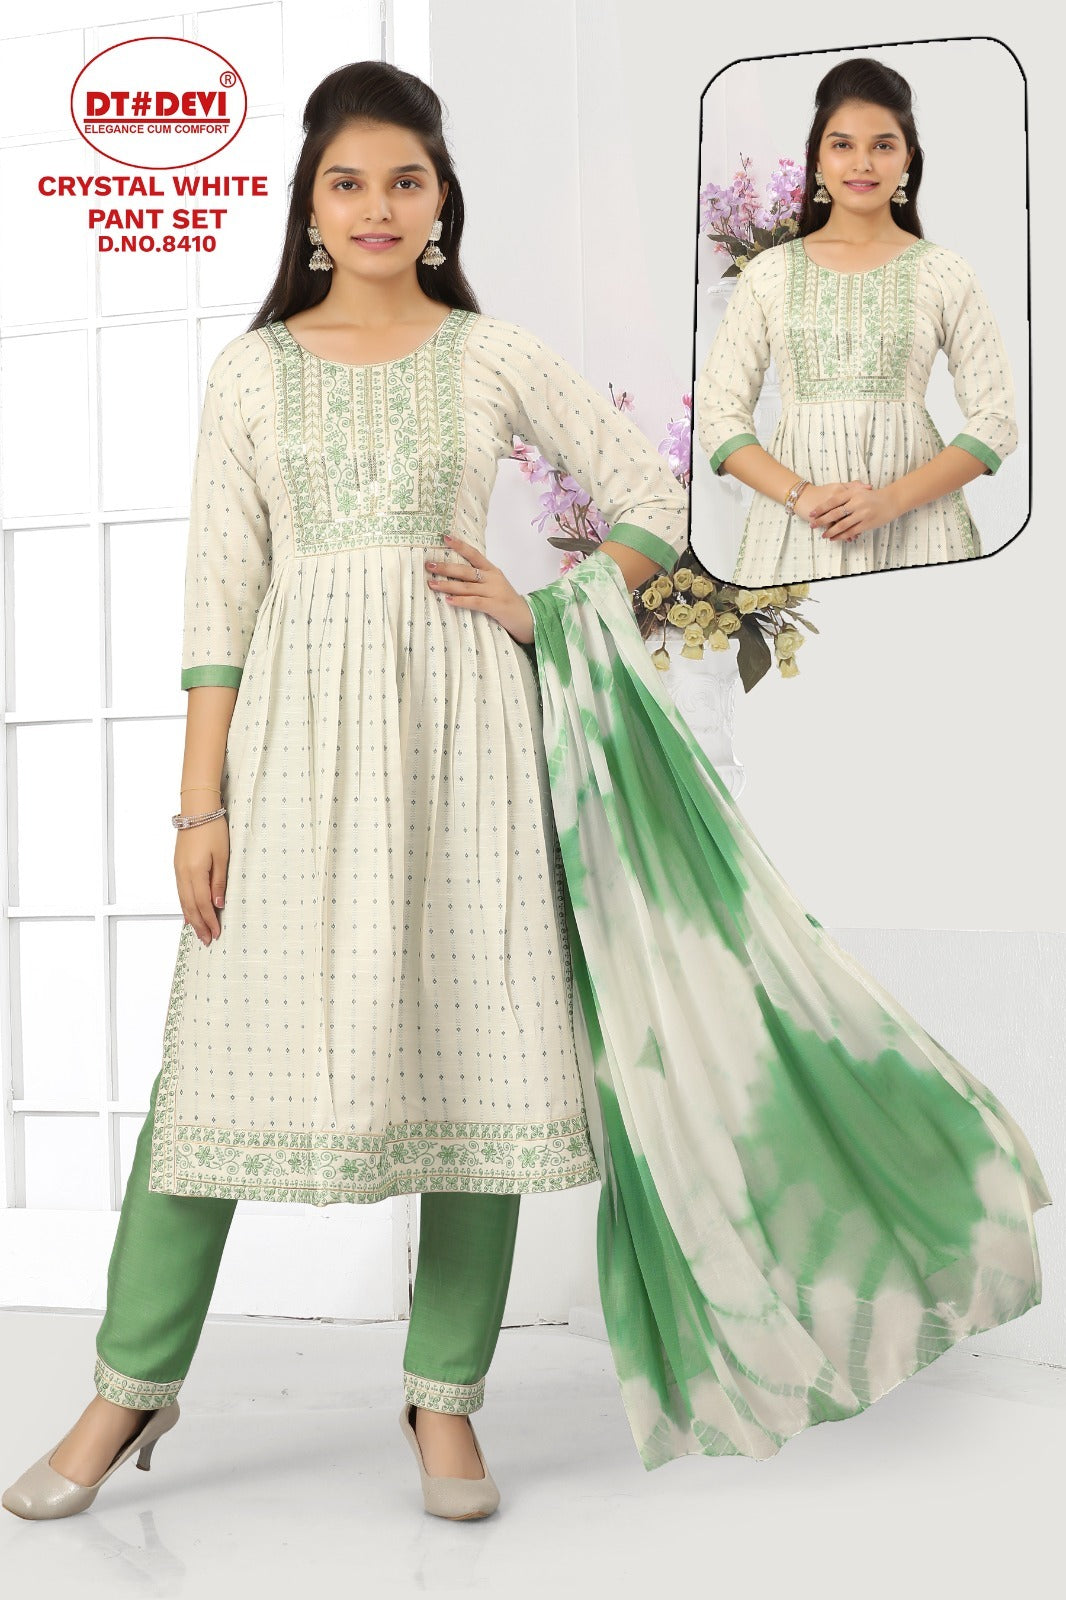 Crystal White Dt Devi Heavy Cotton Girls Readymade Pant Suits